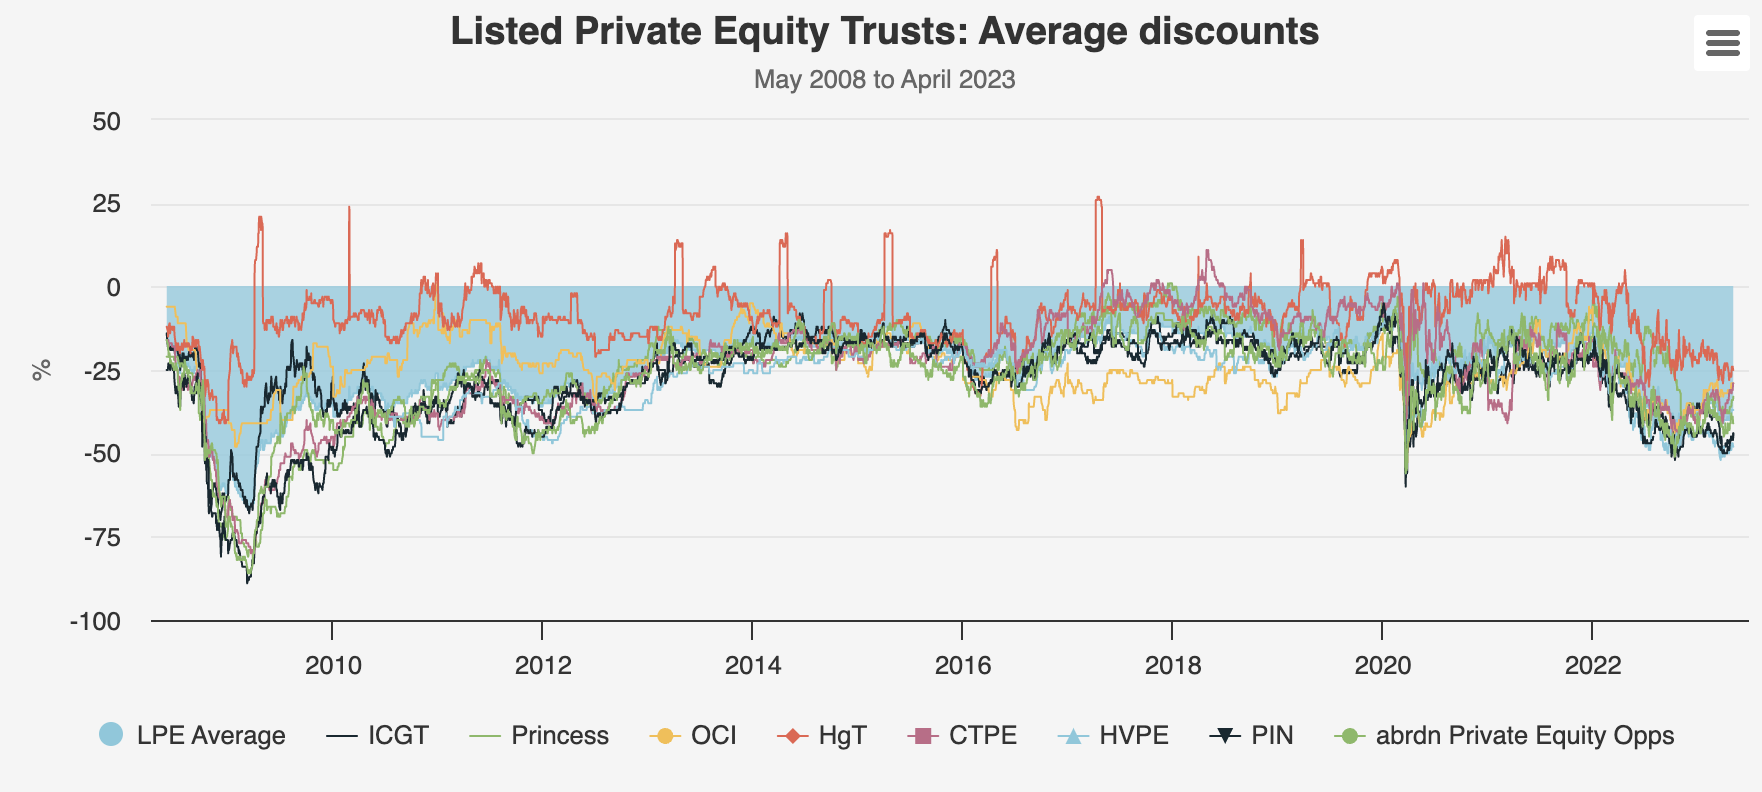 Listed private equity trusts: average discounts May 2023